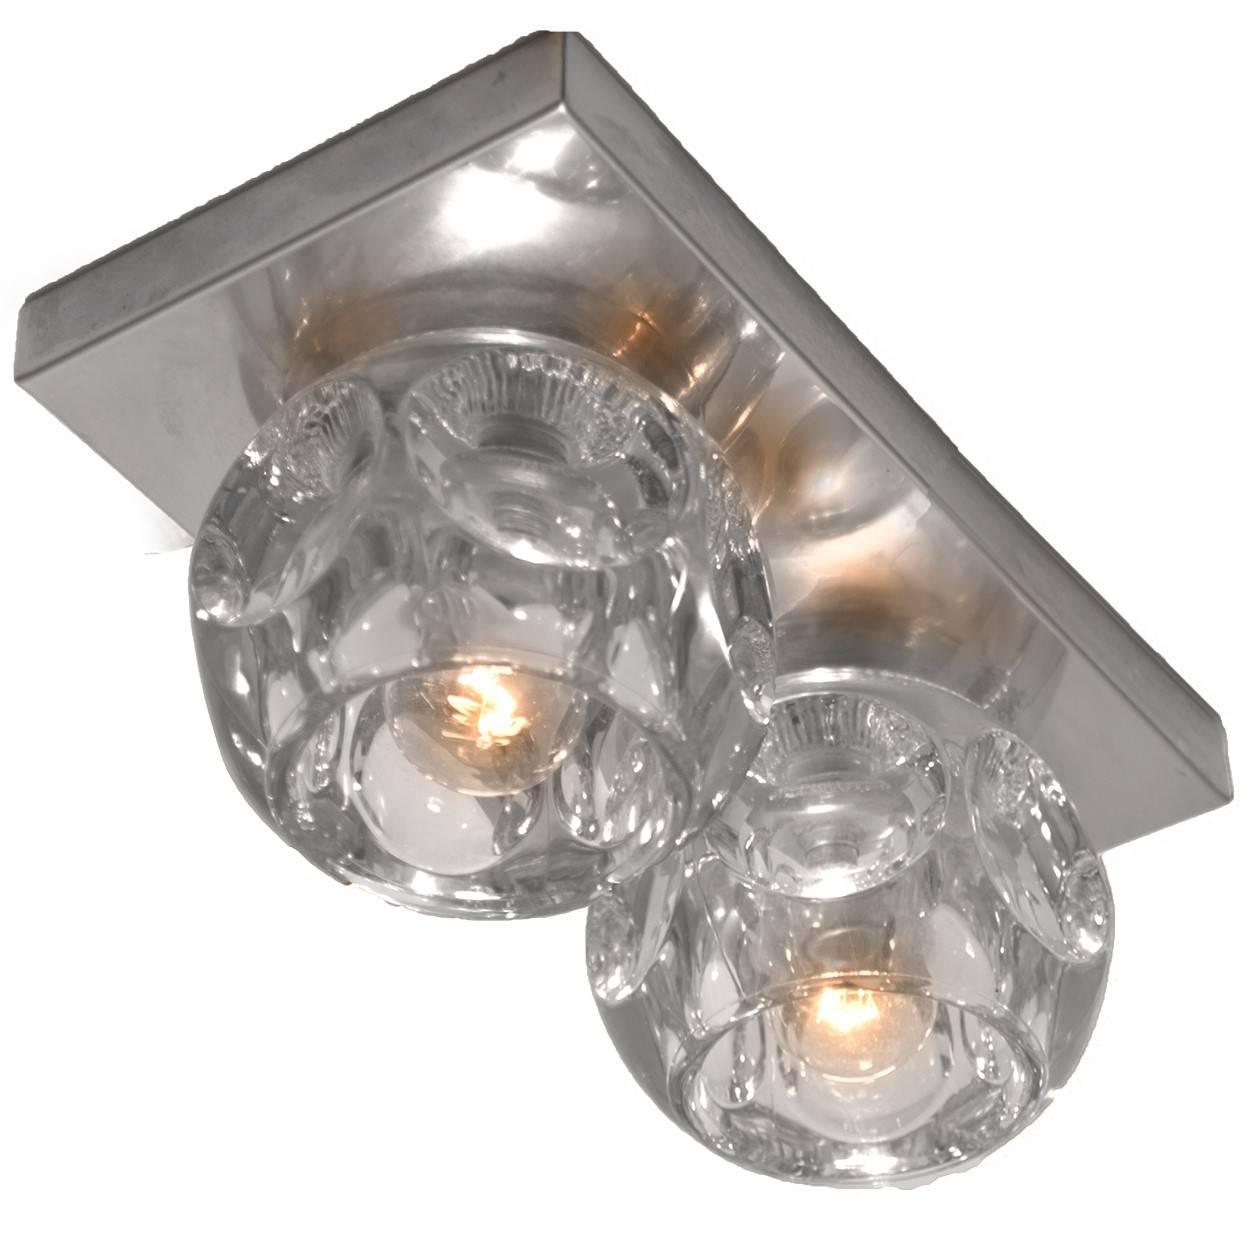 A beautiful set of Peill and Putzler light fixtures (wall or ceiling). Each sculptural light consists several clear glass cubes on a chrome frame which beautifully reflects the light with a warm glow. The quality thick clear glass shades have a